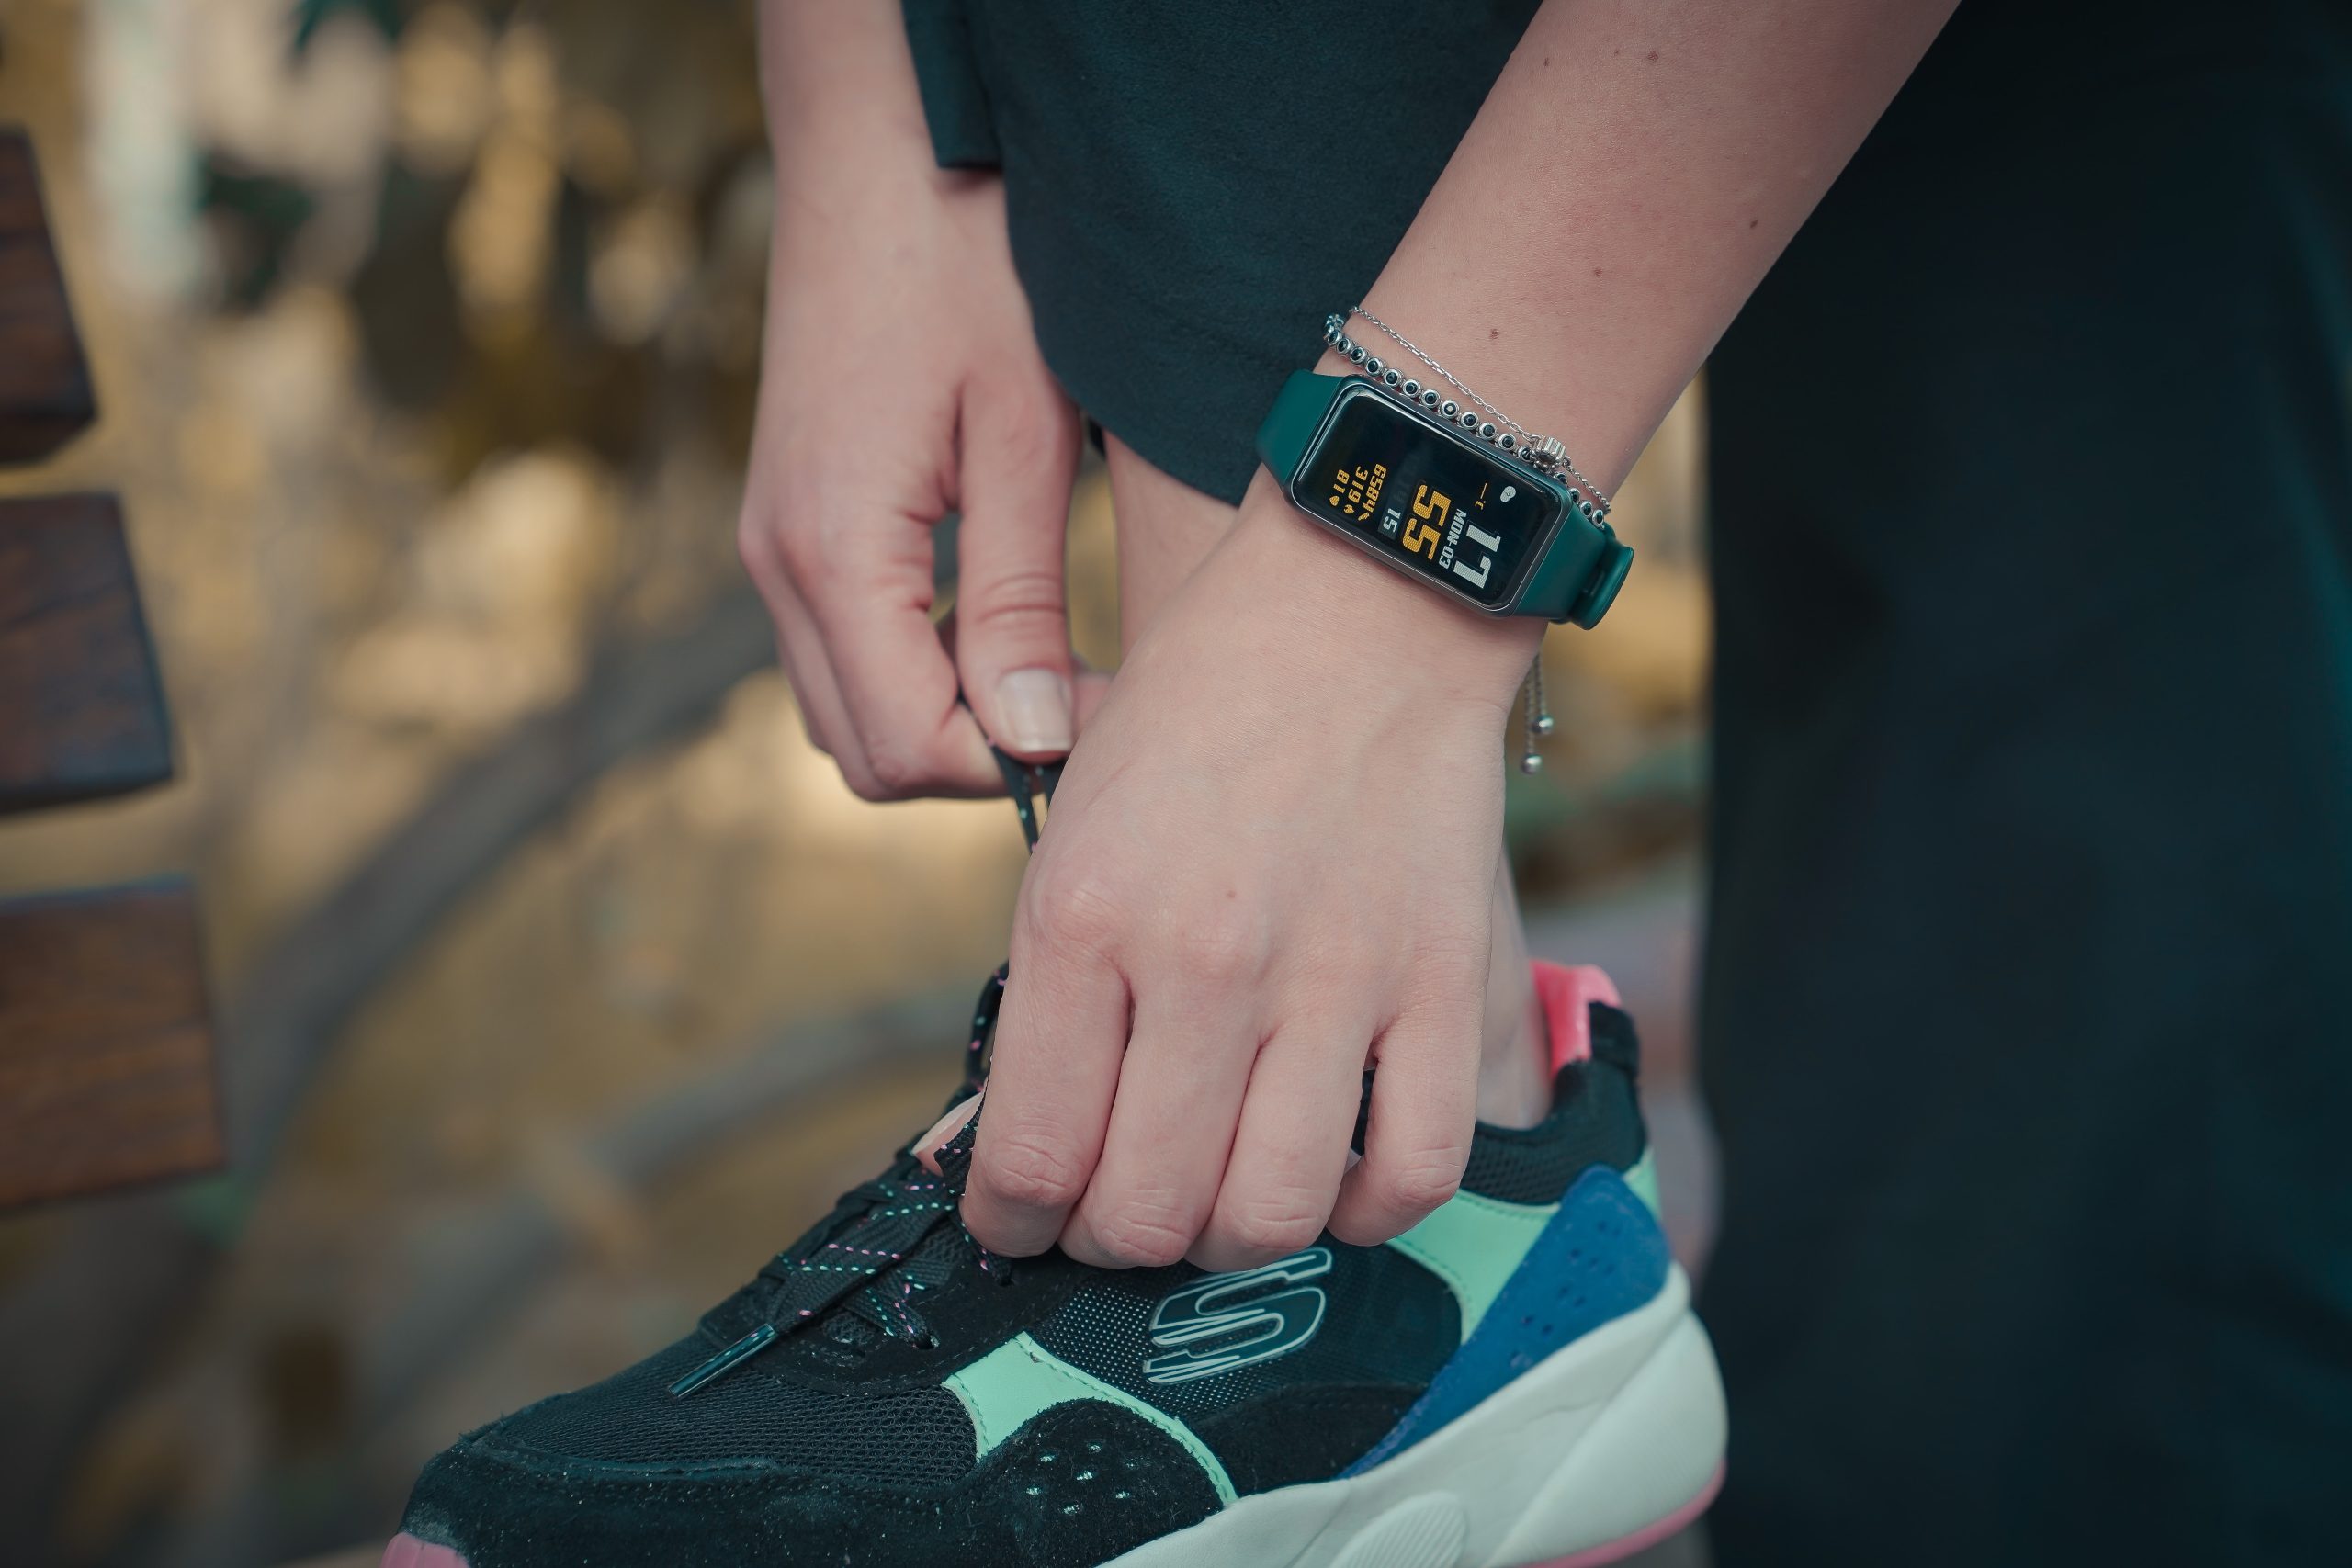 Can An Activity Tracker Motivate You To Exercise More And Lose Weight?